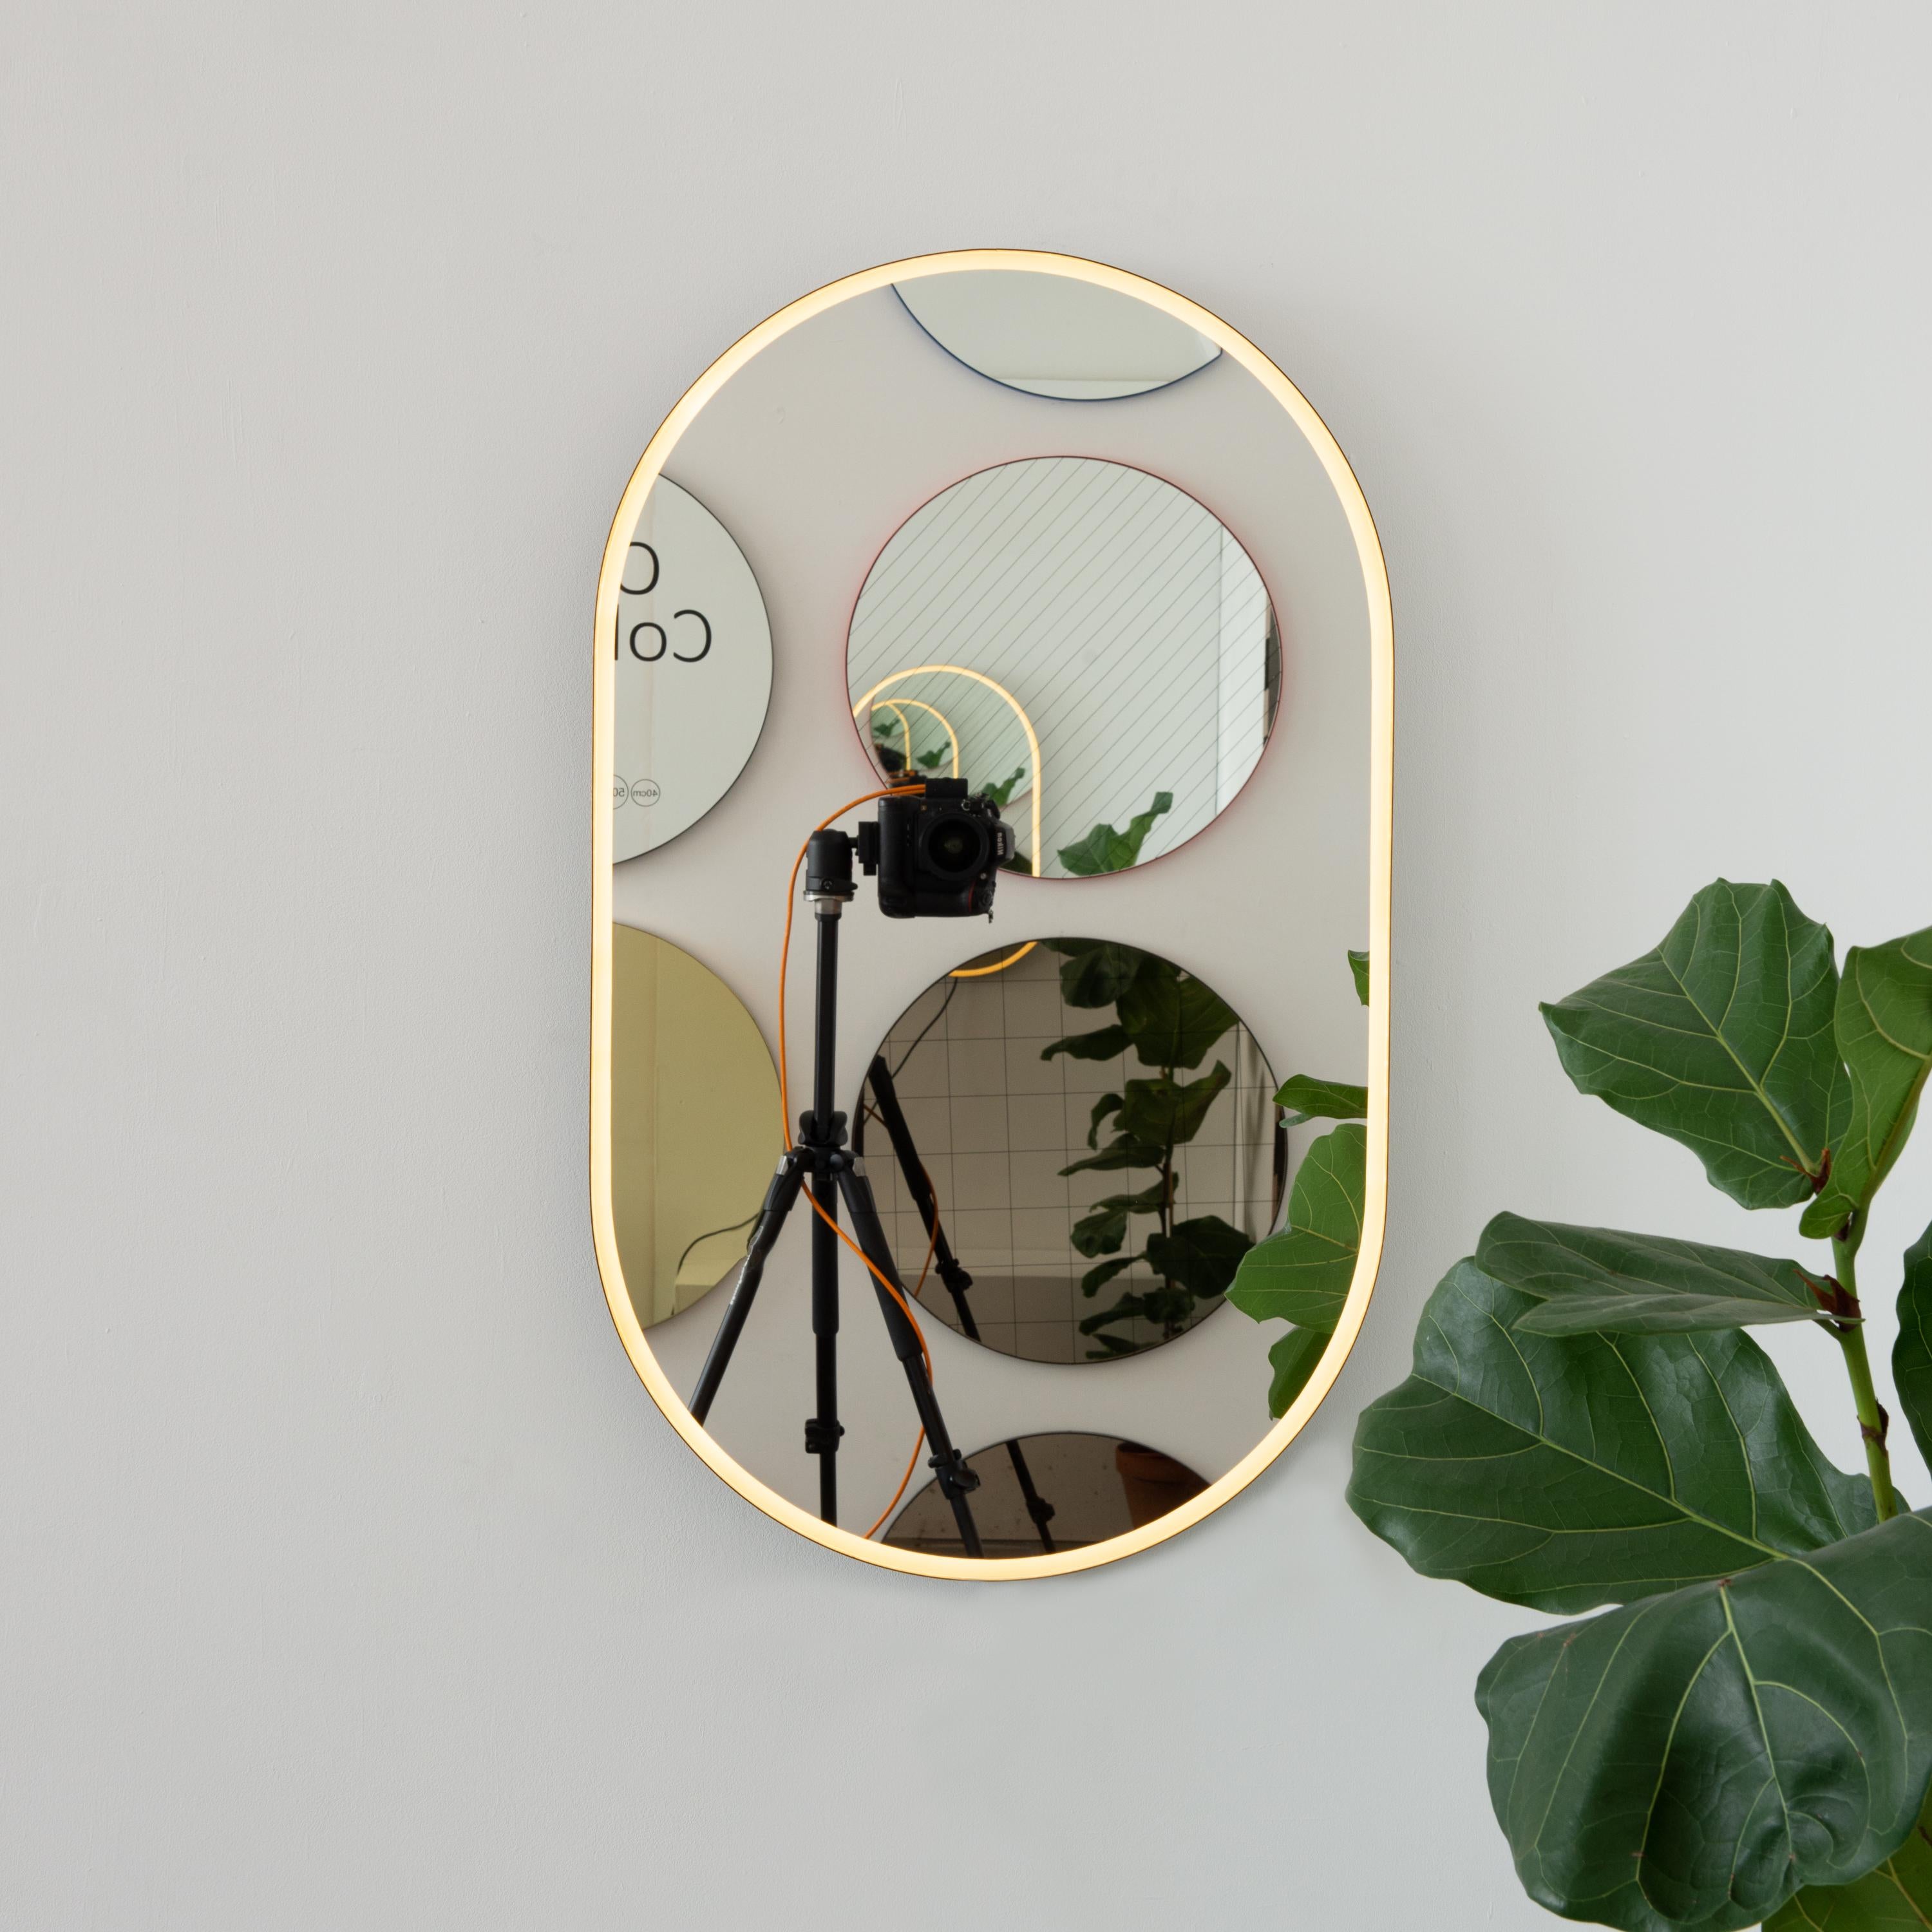 Modern handcrafted front illuminated capsule shaped mirror with an elegant bronze patina brass frame. Designed and handcrafted in London, UK.

Medium, large and extra-large (37cm x 56cm, 46cm x 71cm and 48cm x 97cm) mirrors are fitted with an